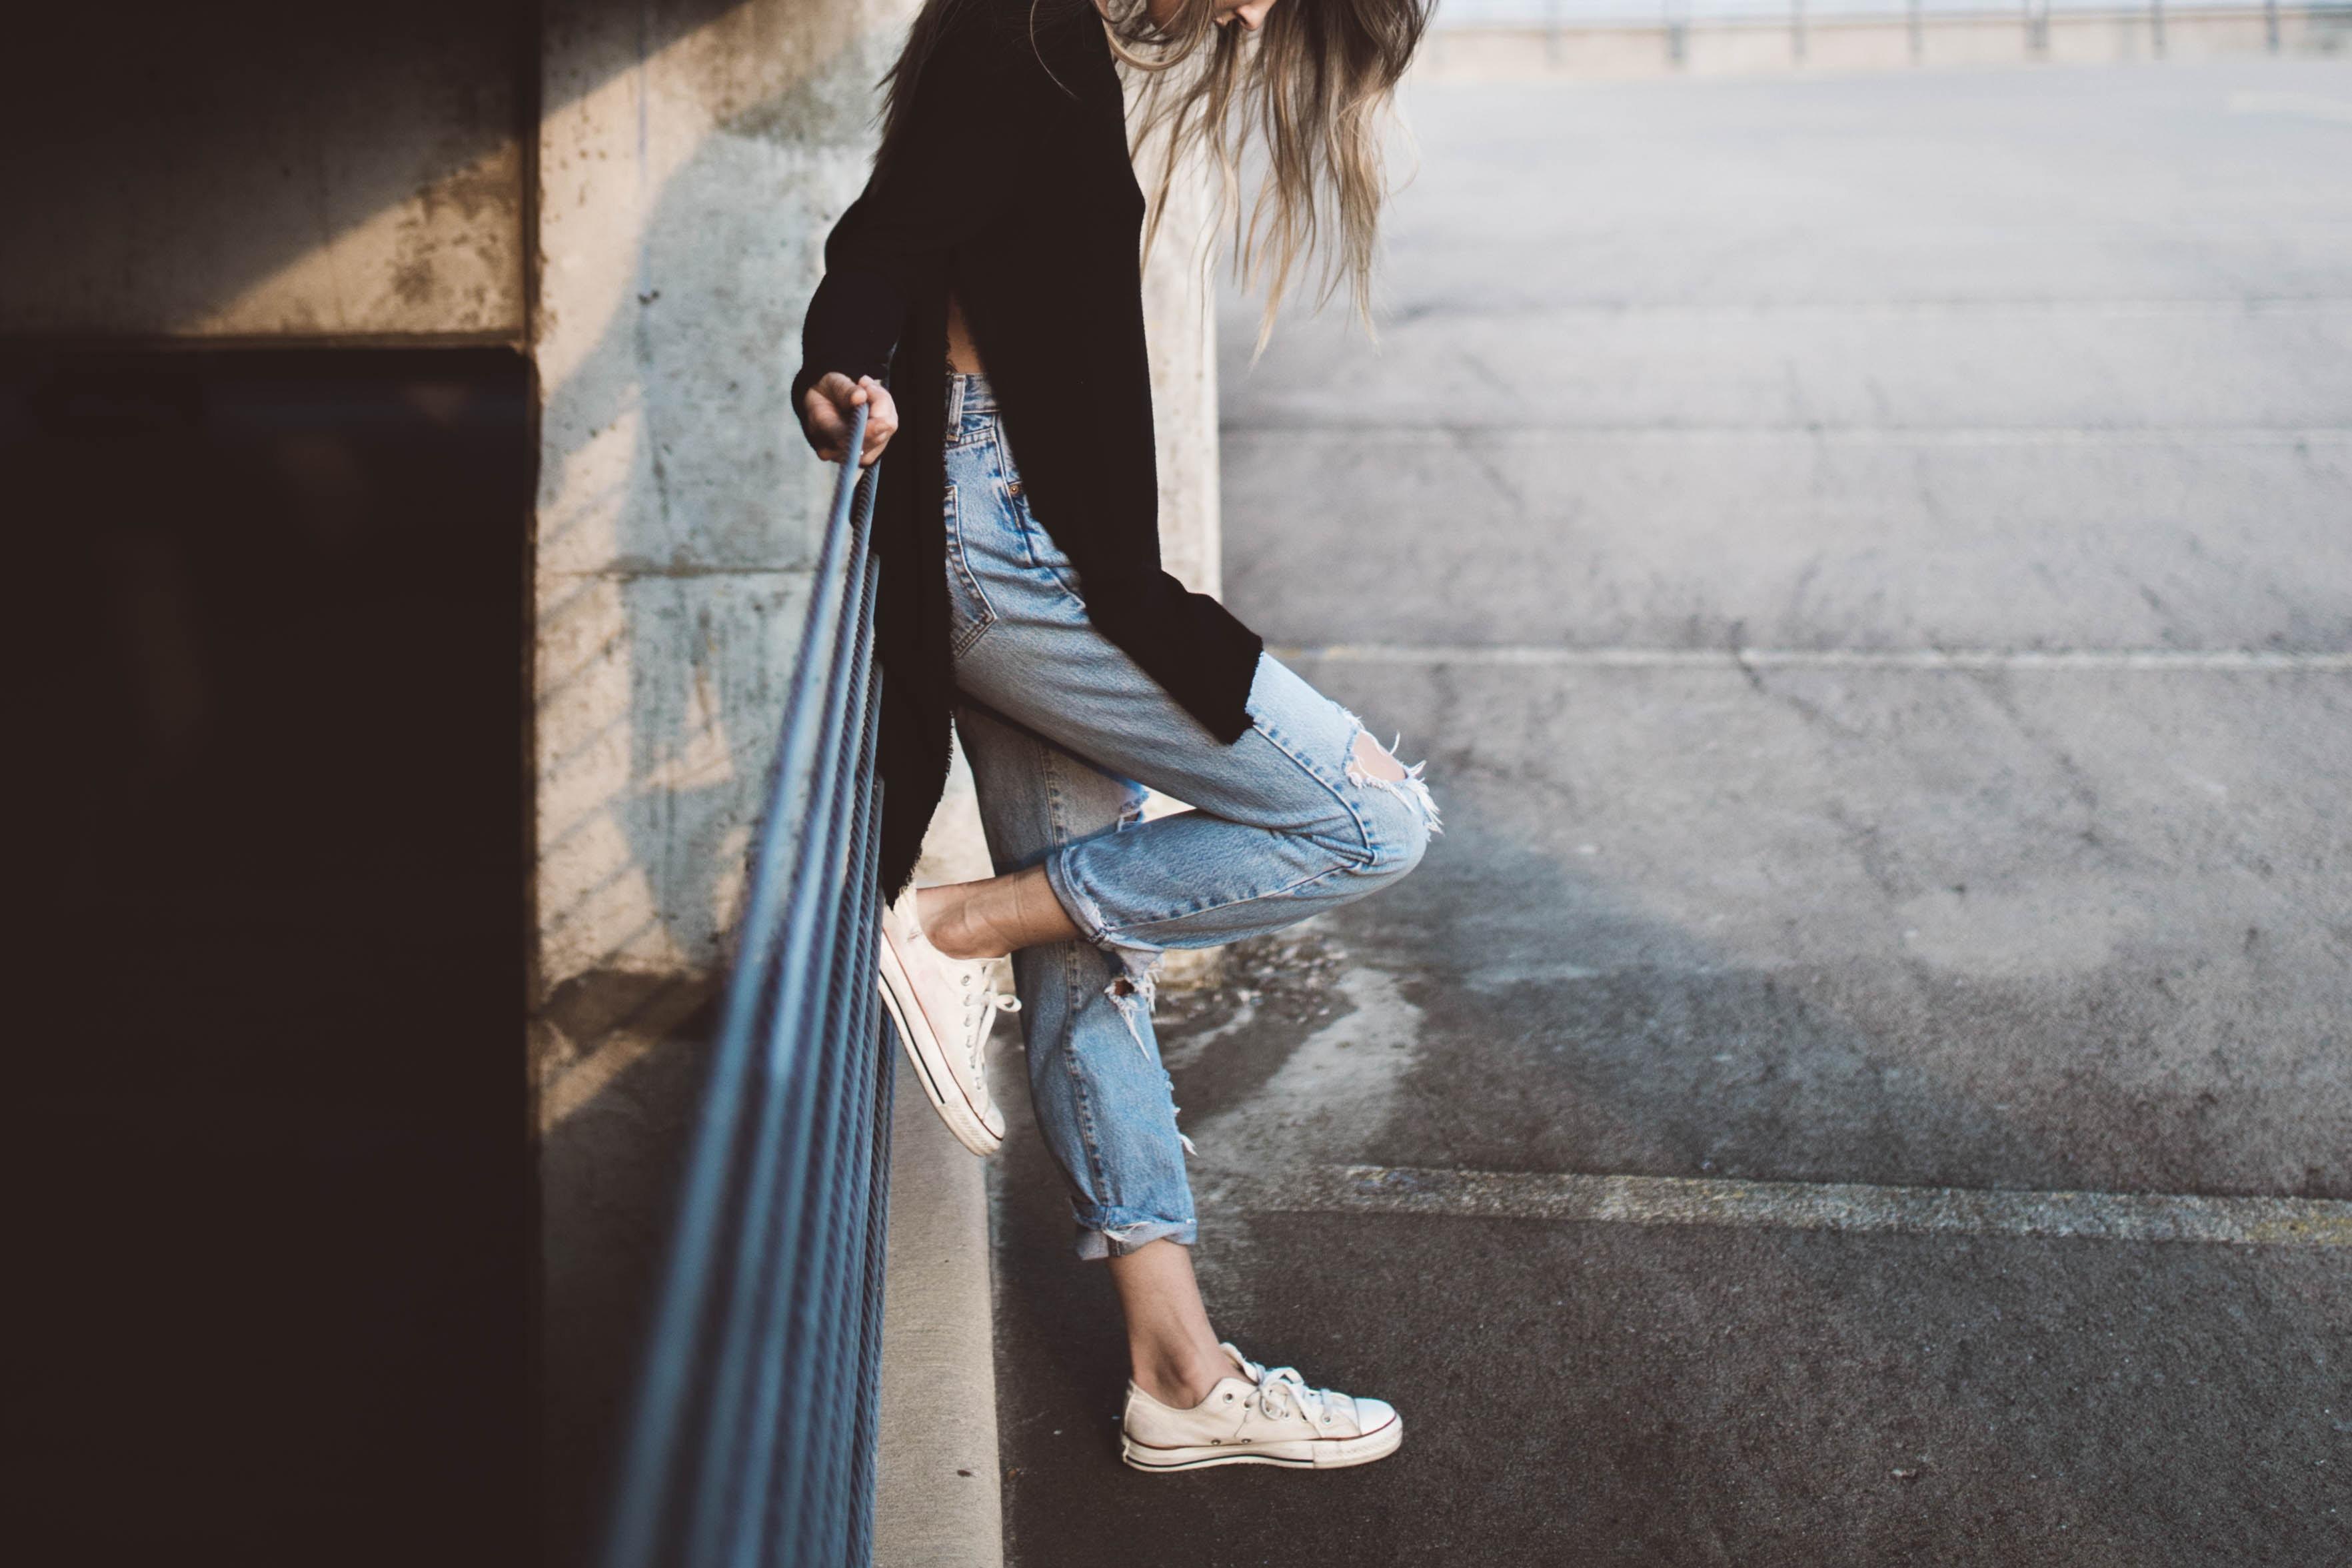 3529x2353 #girl, #lady, #wallpaper, #fashion, #garage, #urban, #hipster, #street, #woman, #people background, #style, #people wallpaper, #converse, #moody, #jeans, #PNG image, #posing, #girl on rail, #portrait. Mocah HD Wallpaper